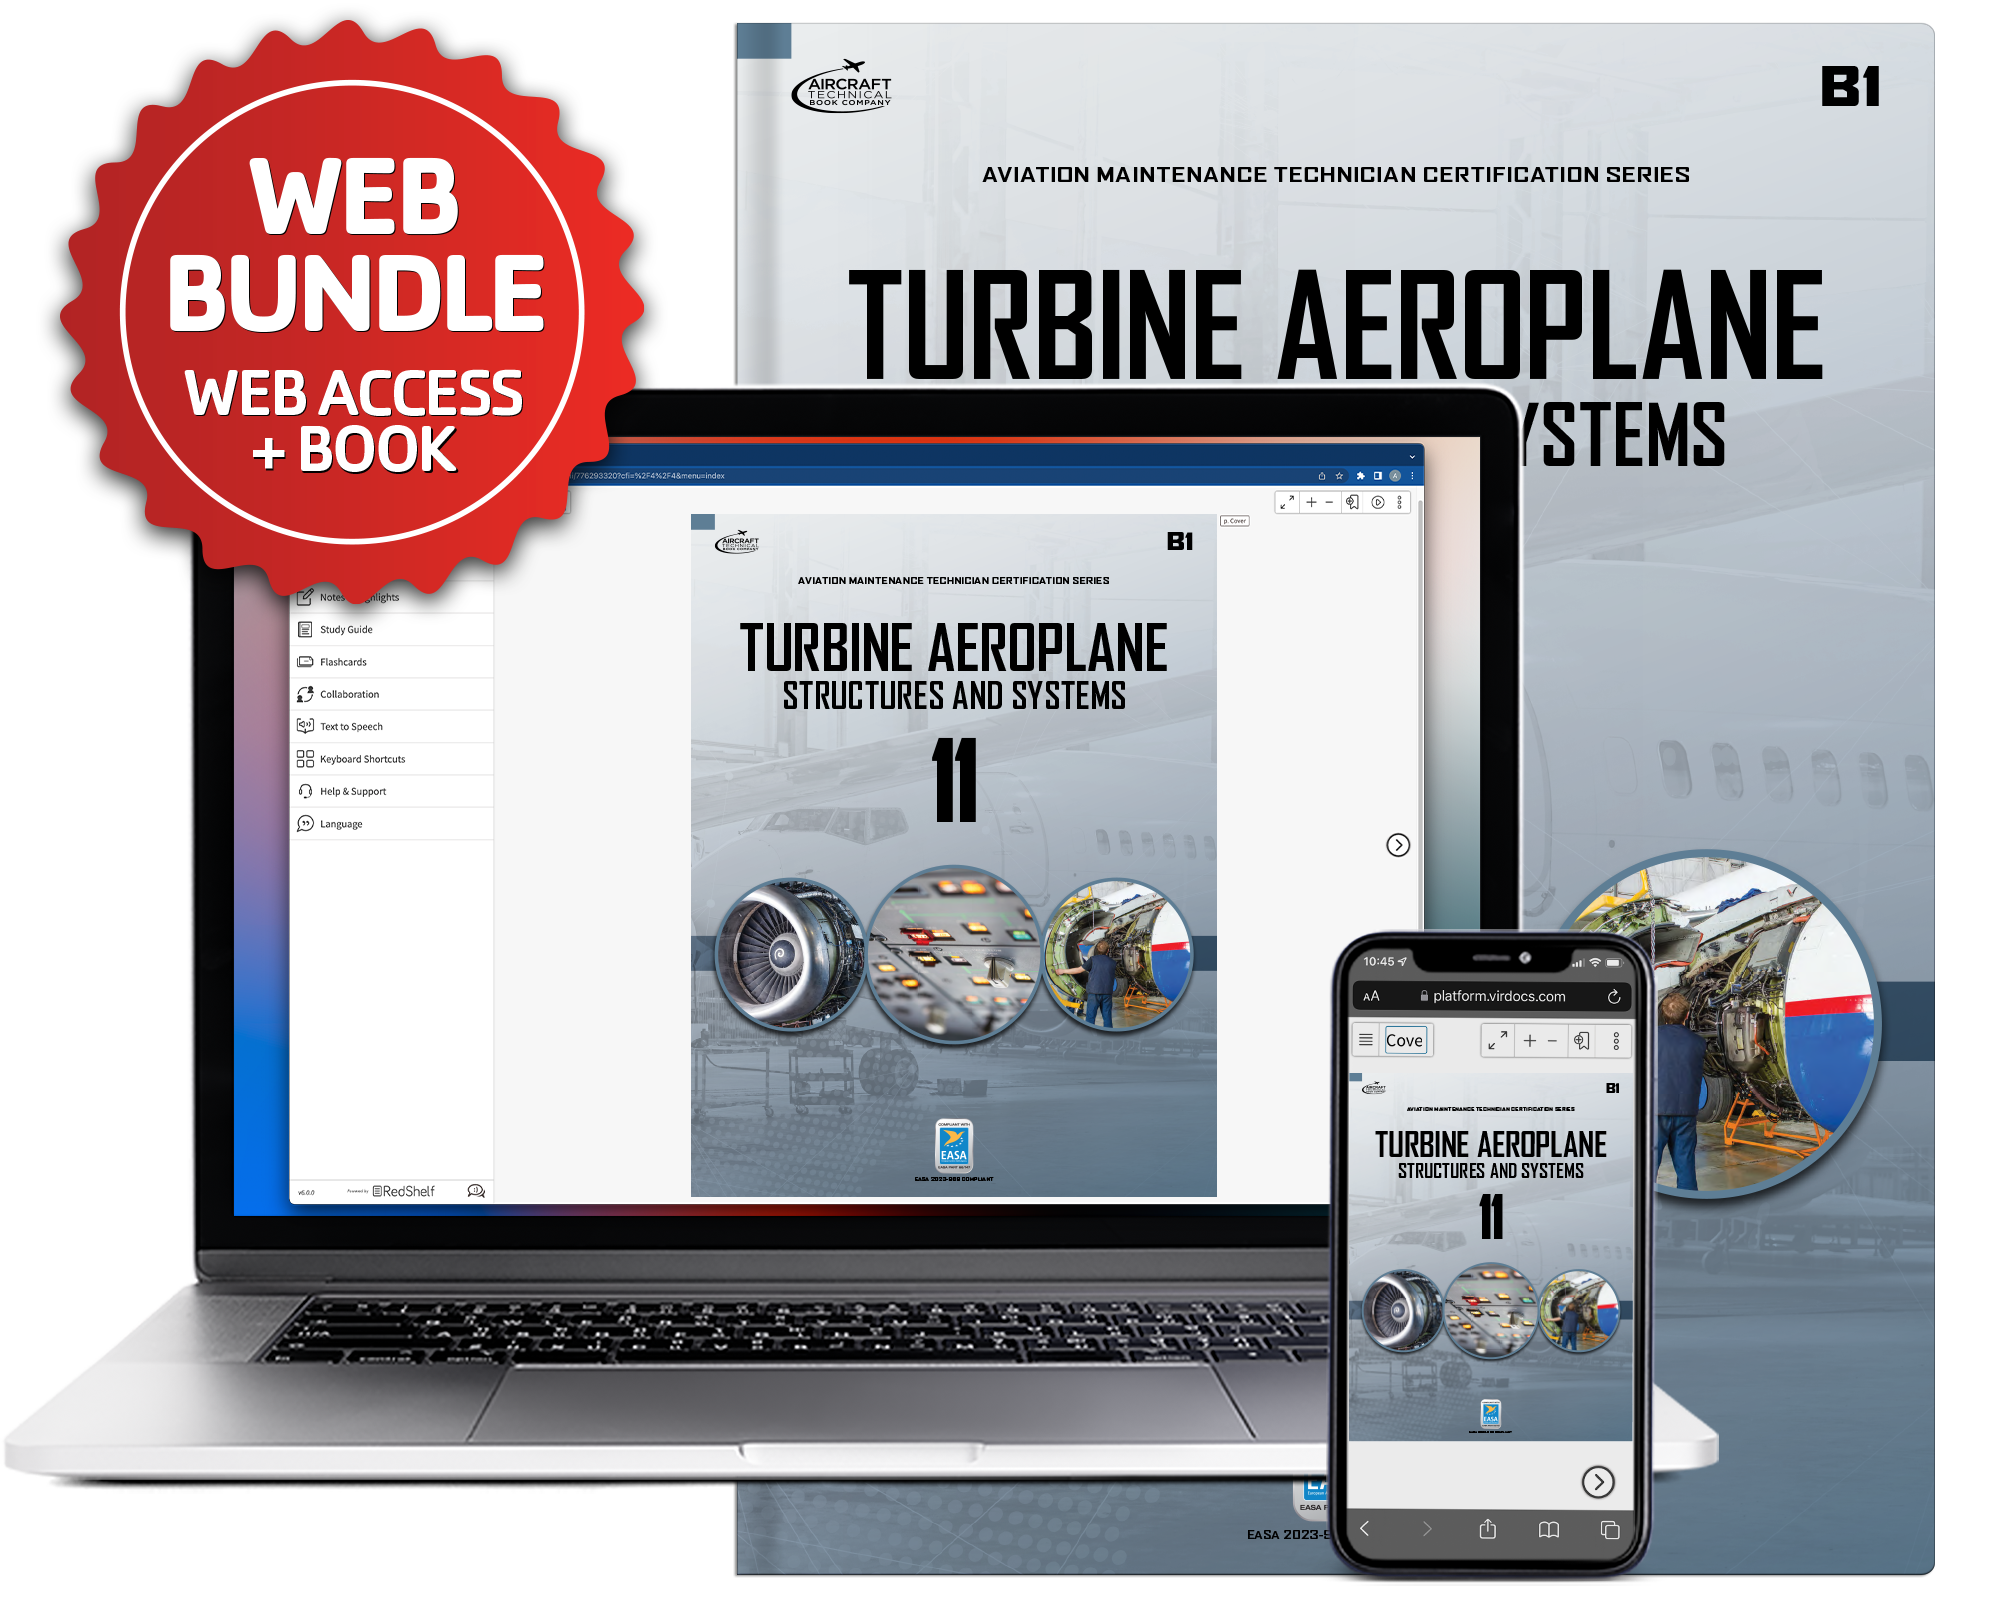 Turbine Aeroplane Structures and Systems: Module 11 (B1) - Online Bundle